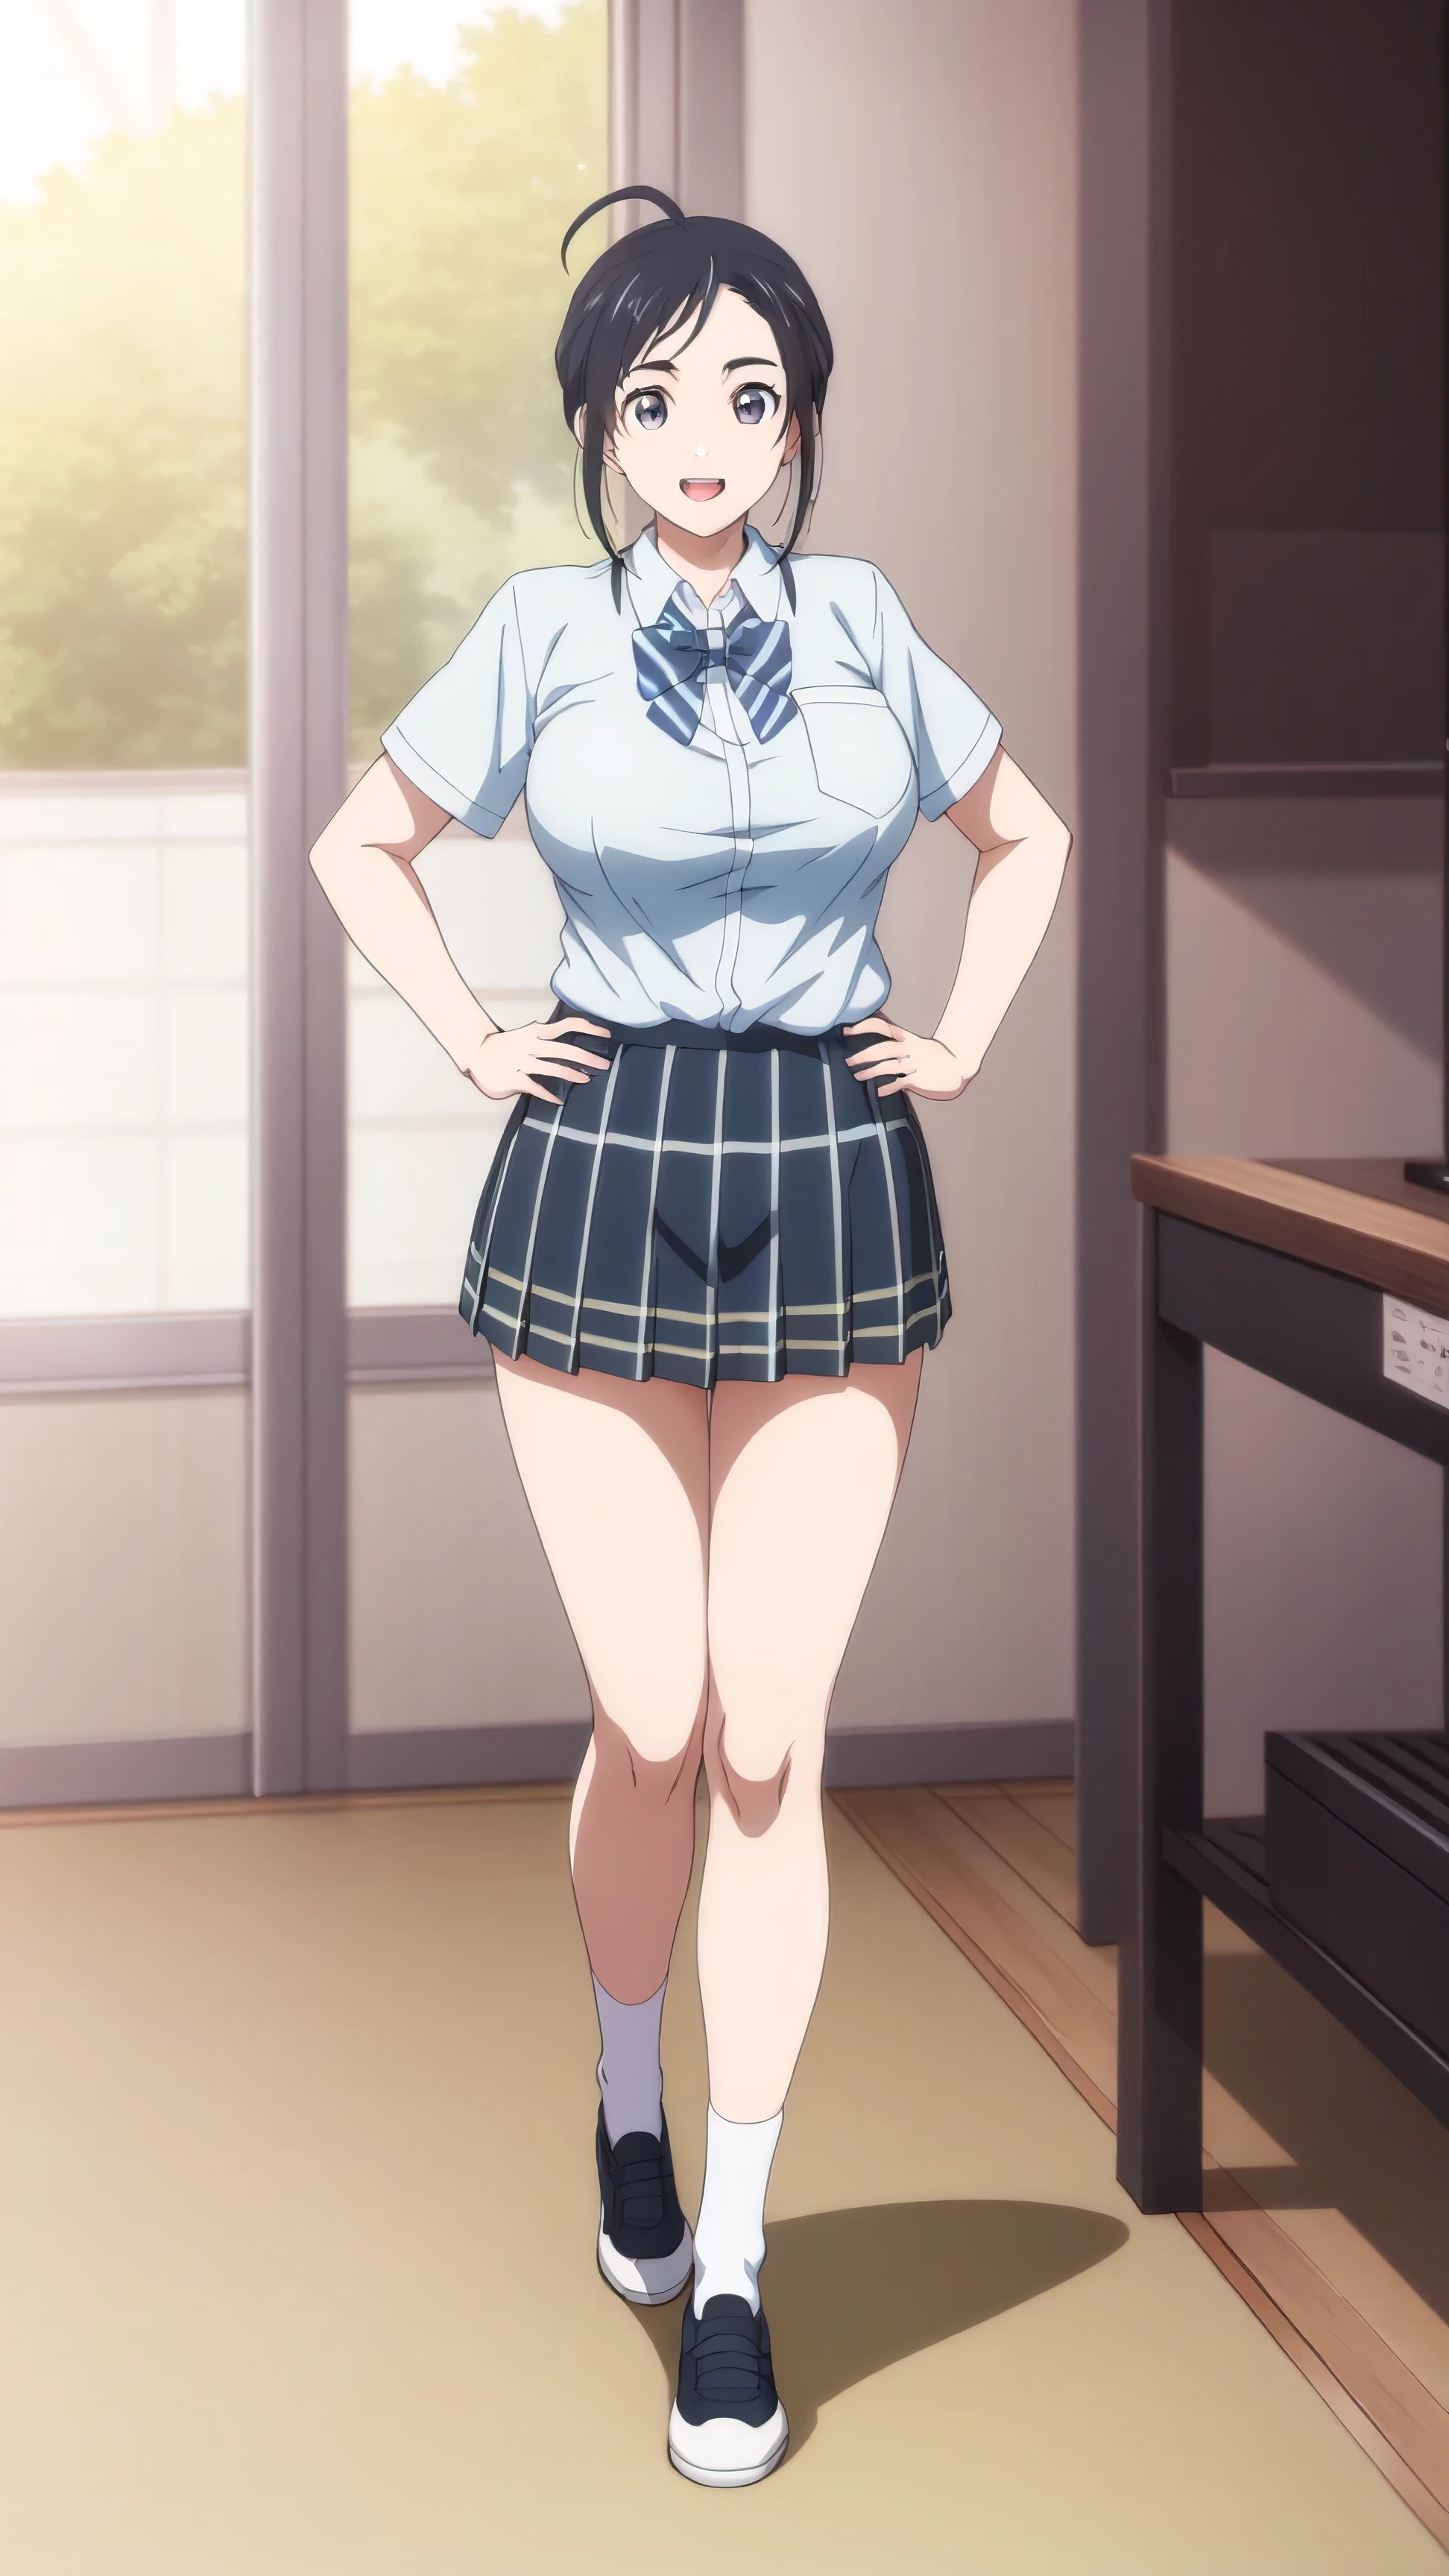 Anime girl in school uniform standing in a room with a window - SeaArt AI